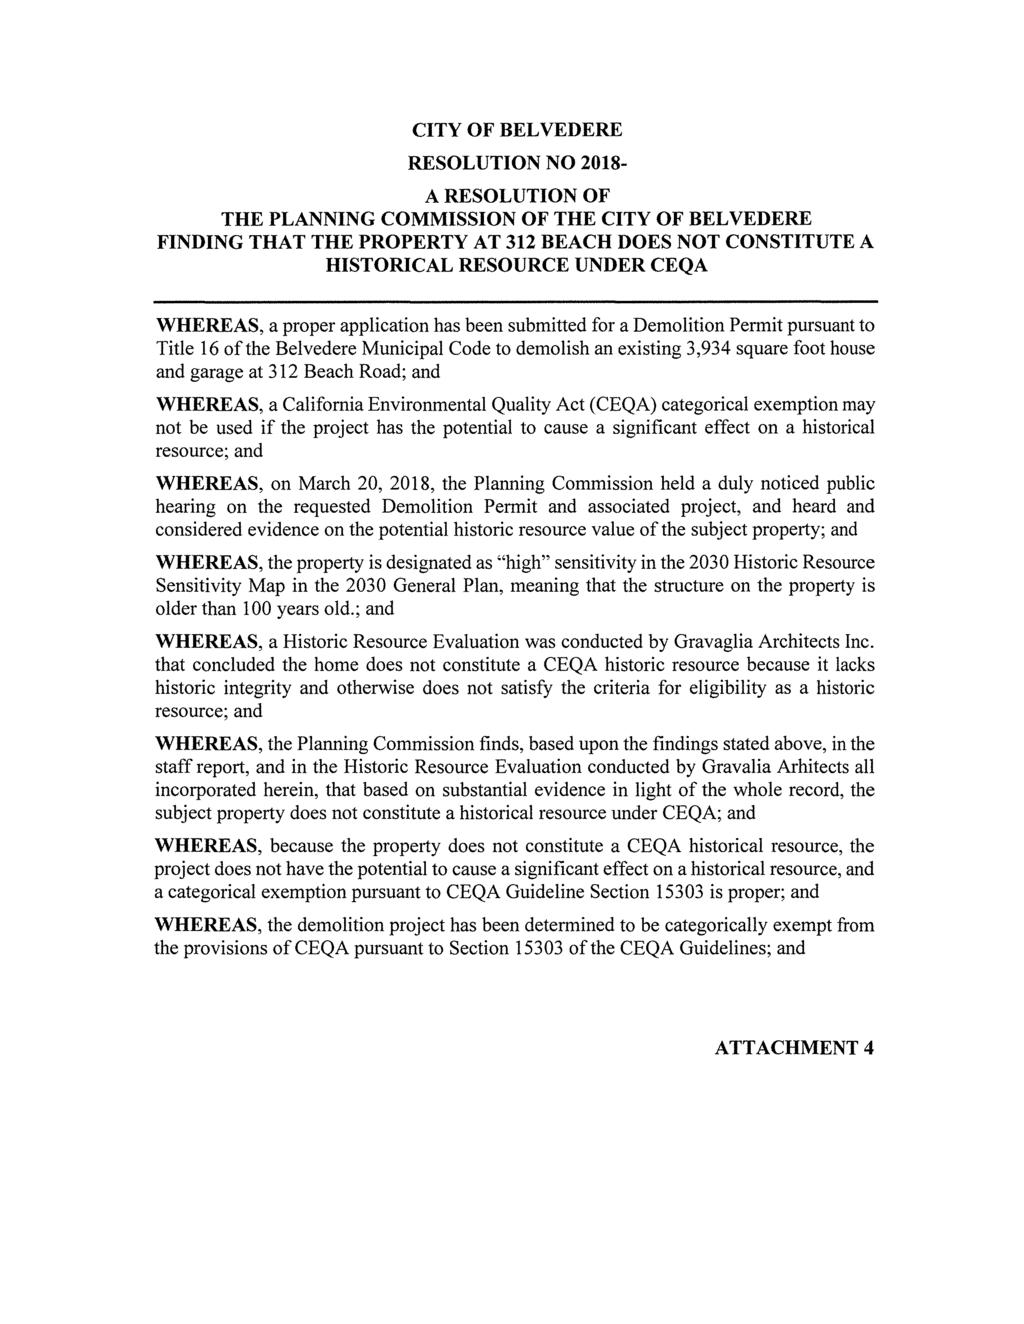 CITY OF BELVEDERE RESOLUTION NO 2018- A RESOLUTION OF THE PLANNING COMMISSION OF THE CITY OF BELVEDERE FINDING THAT THE PROPERTY AT 312 BEACH DOES NOT CONSTITUTE A HISTORICAL RESOURCE UNDER CEQA